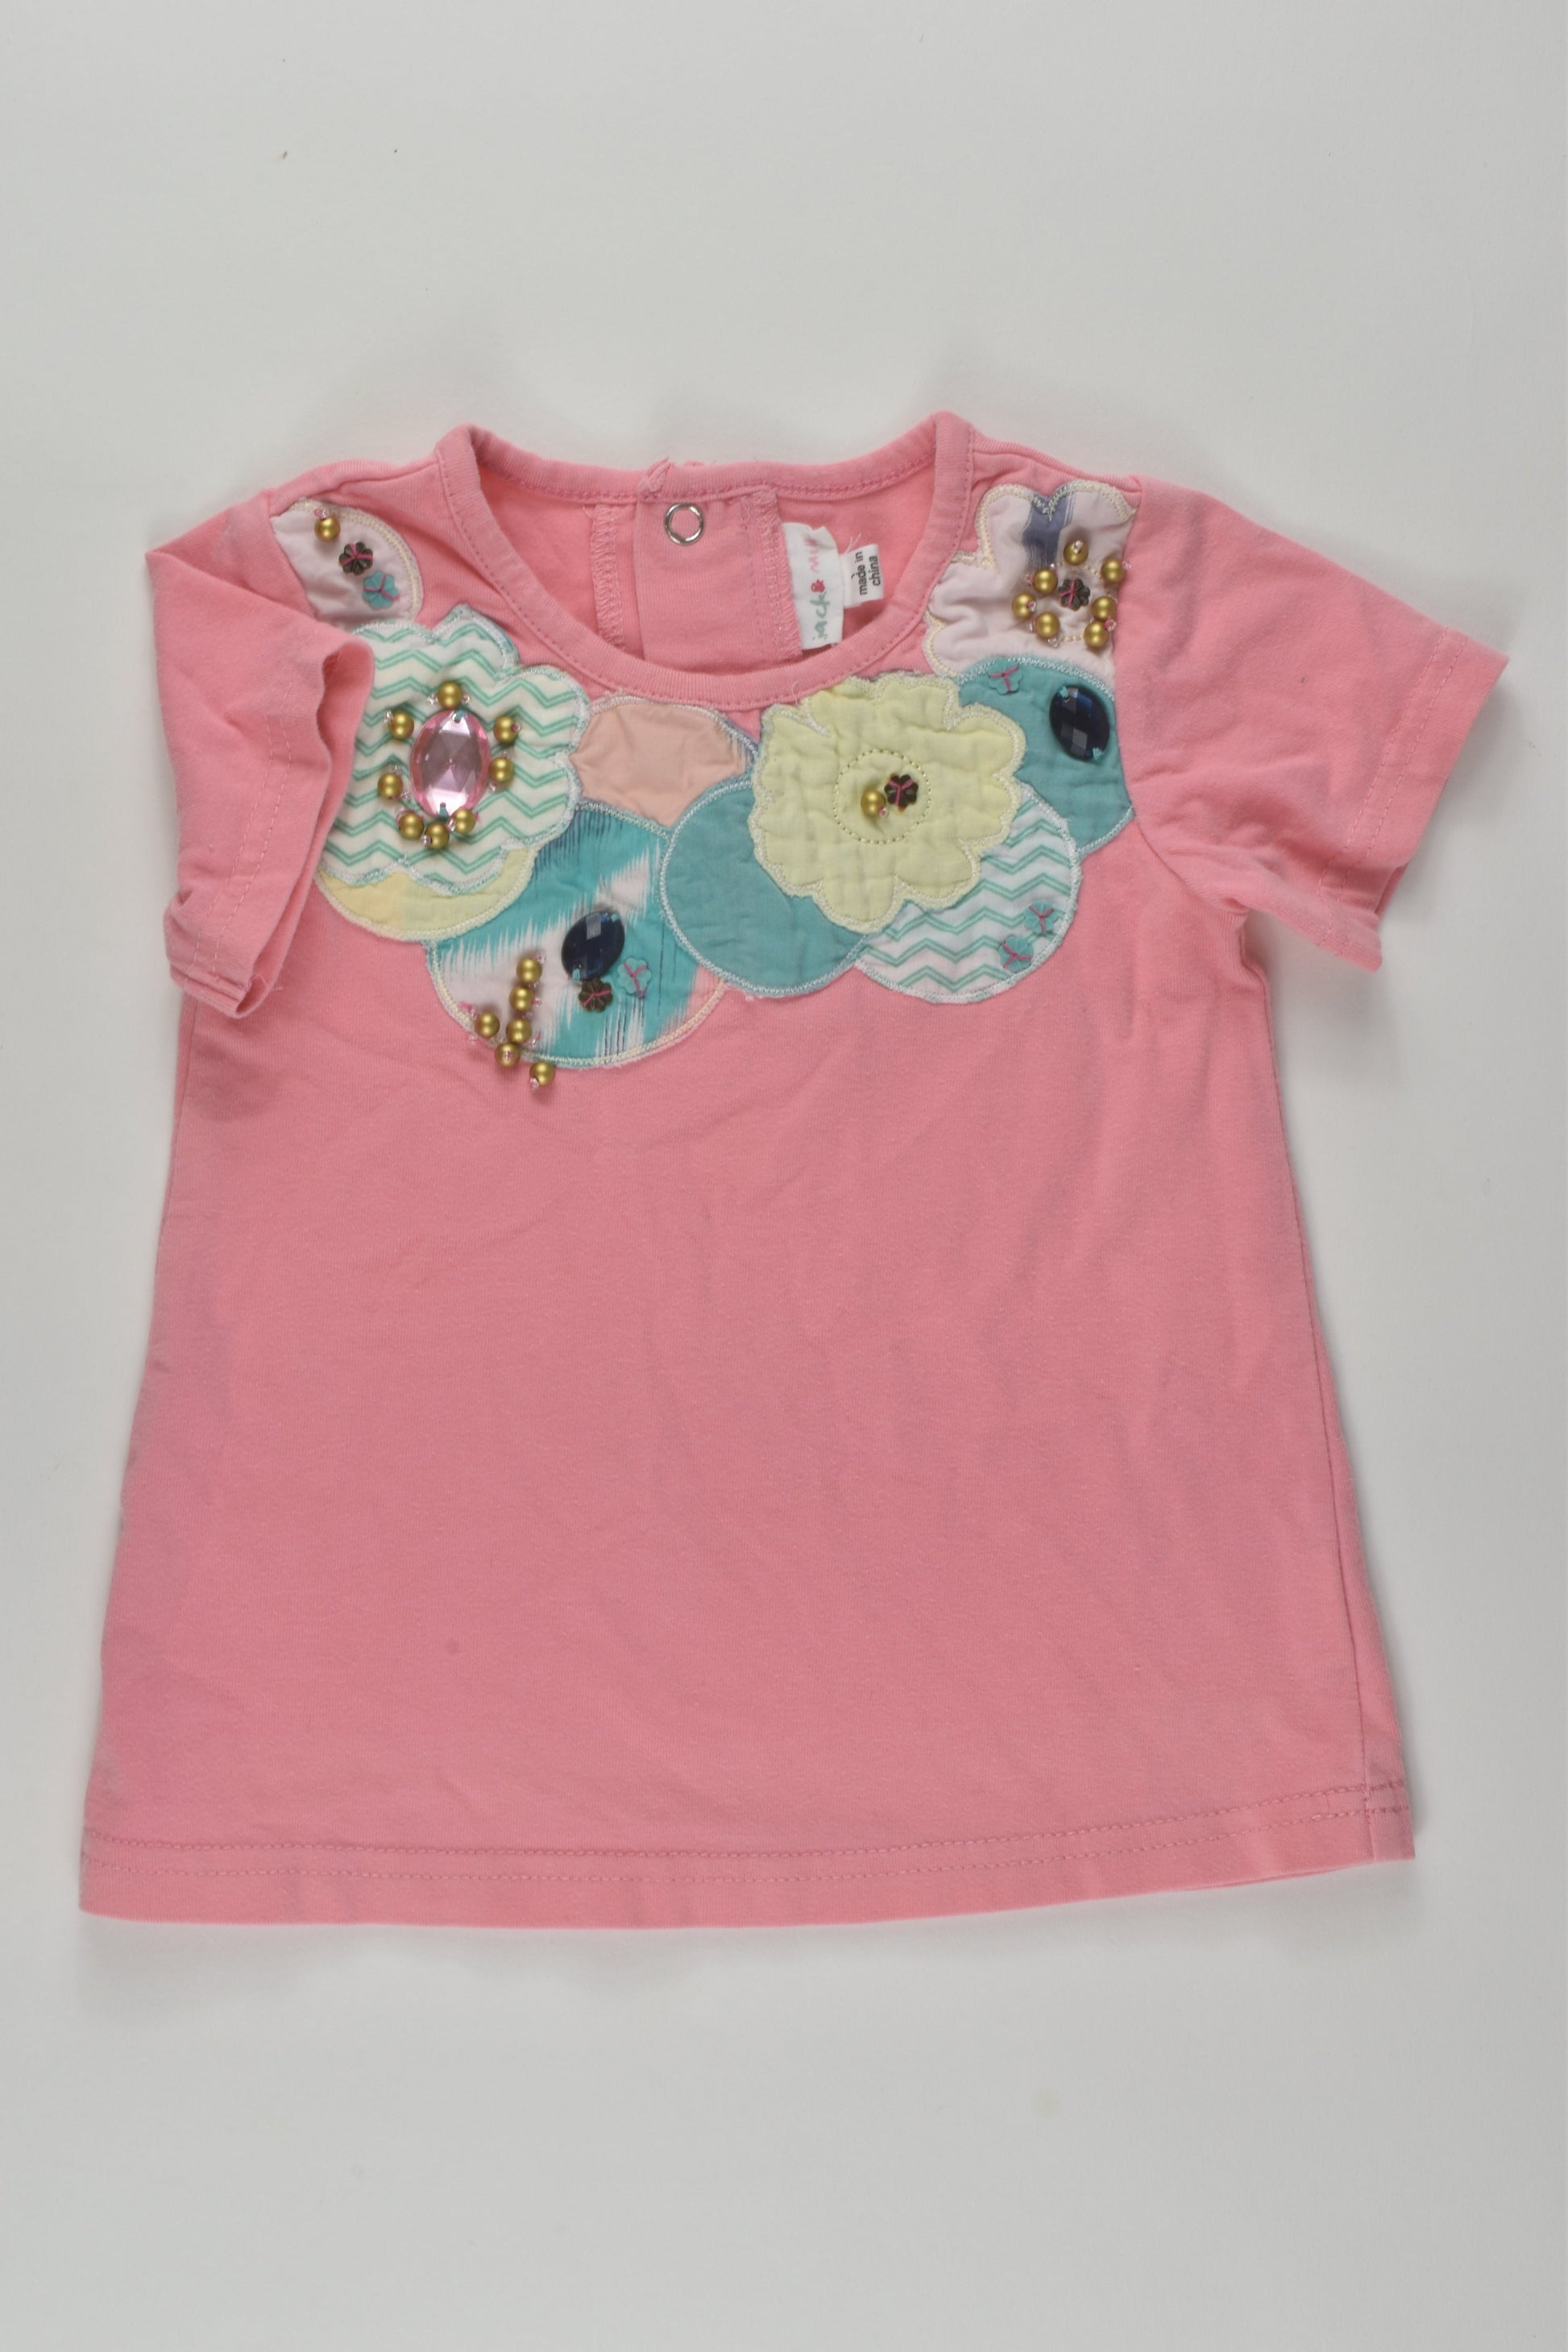 Jack & Milly Size 1 T-shirt